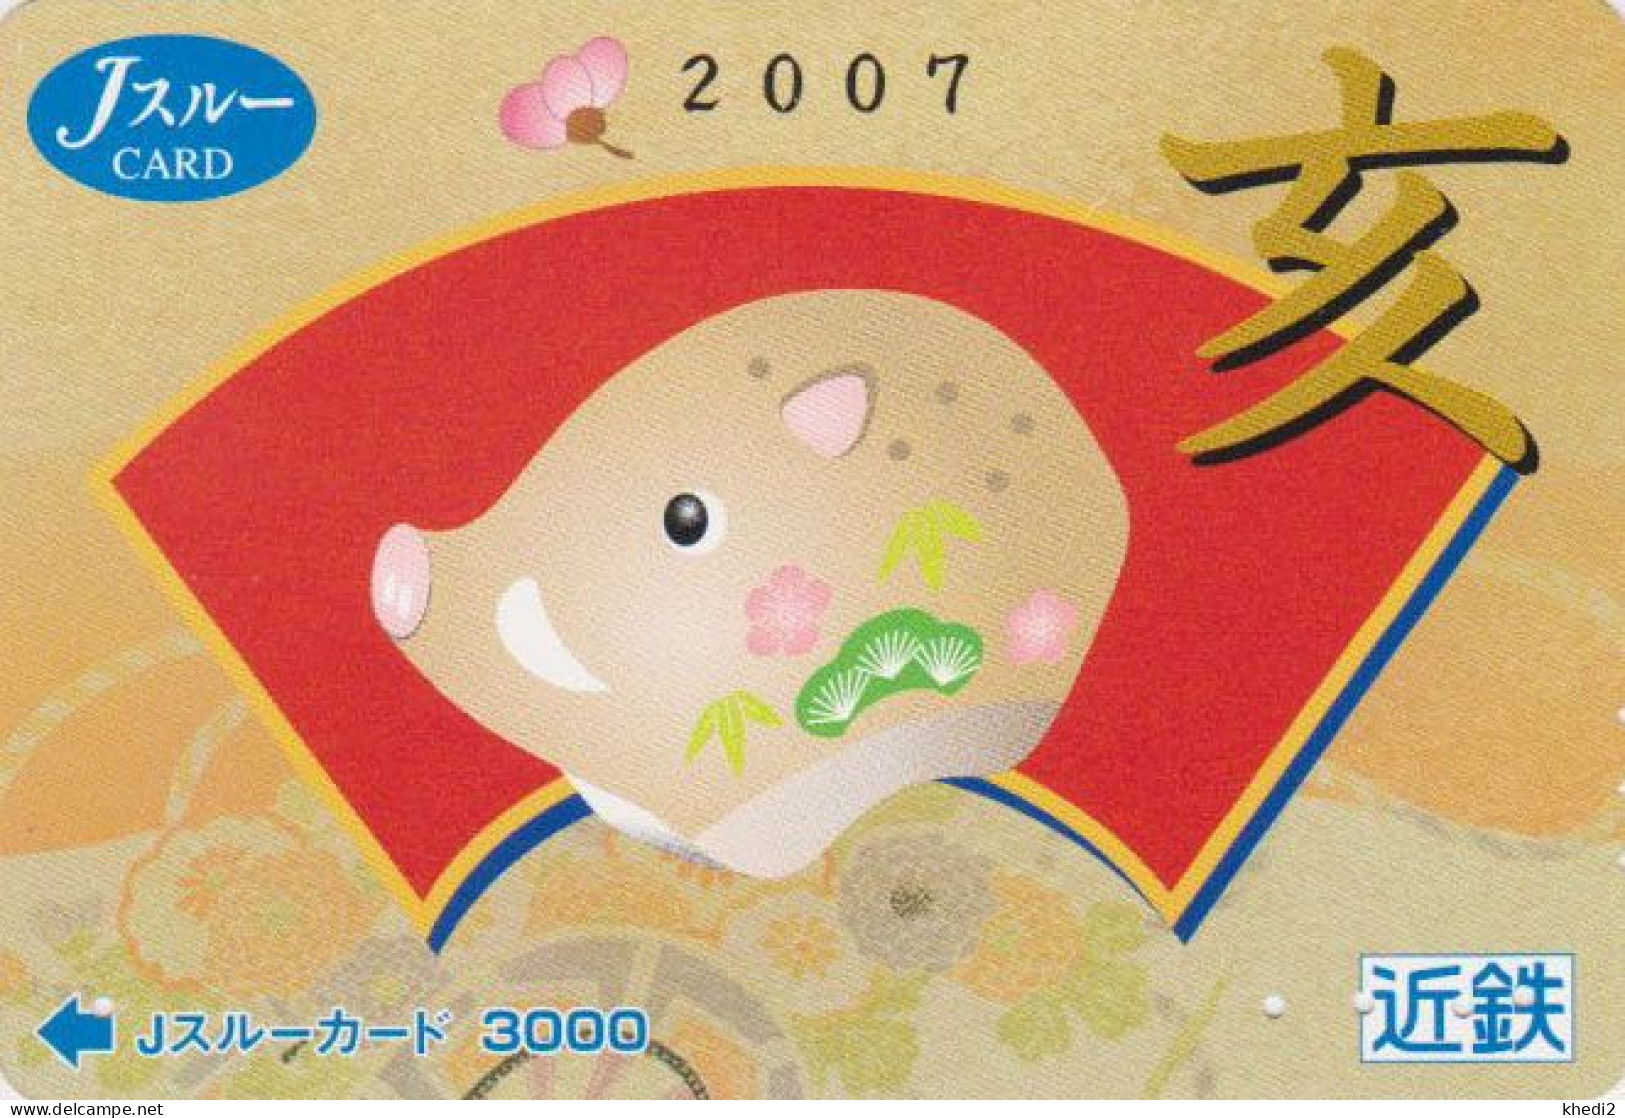 Carte JAPON - ZODIAQUE Chinois 2007 - ANIMAL - SANGLIER - BOAR Chinese Horoscope JAPAN JR J Ticket Card - Zodiaque